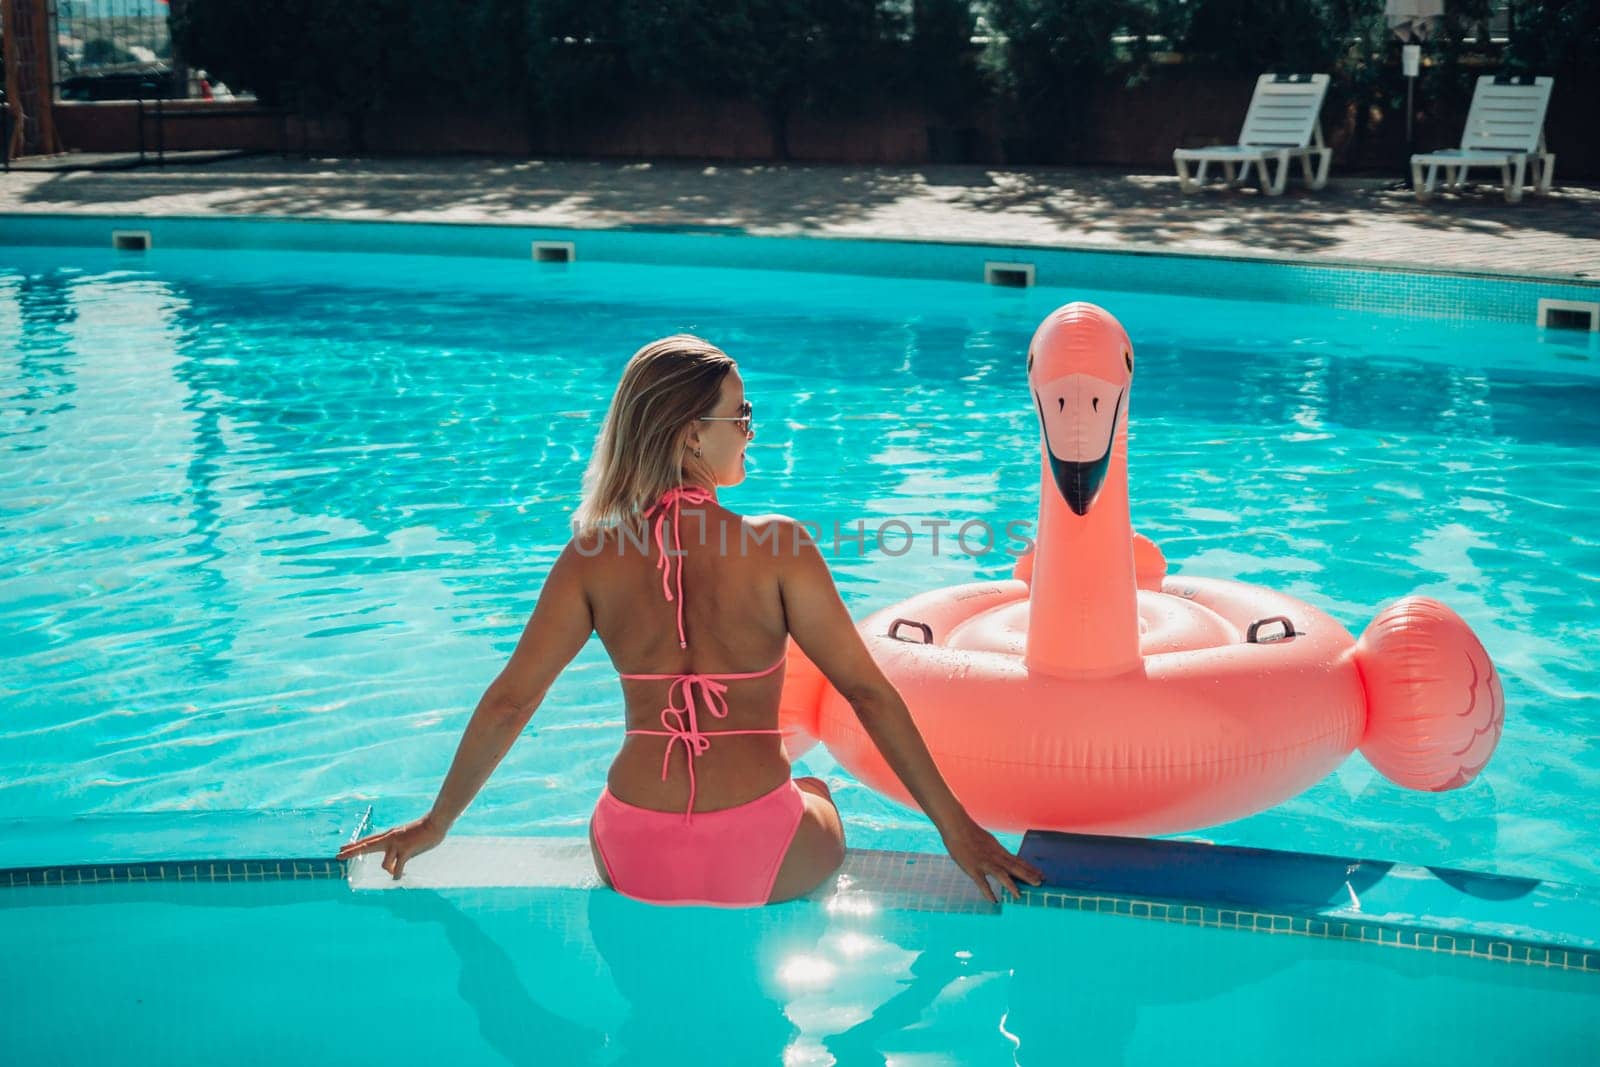 A woman in a pink bikini is sitting on a pink inflatable flamingo in a pool. The scene is playful and fun, with the woman enjoying her time in the water. by Matiunina